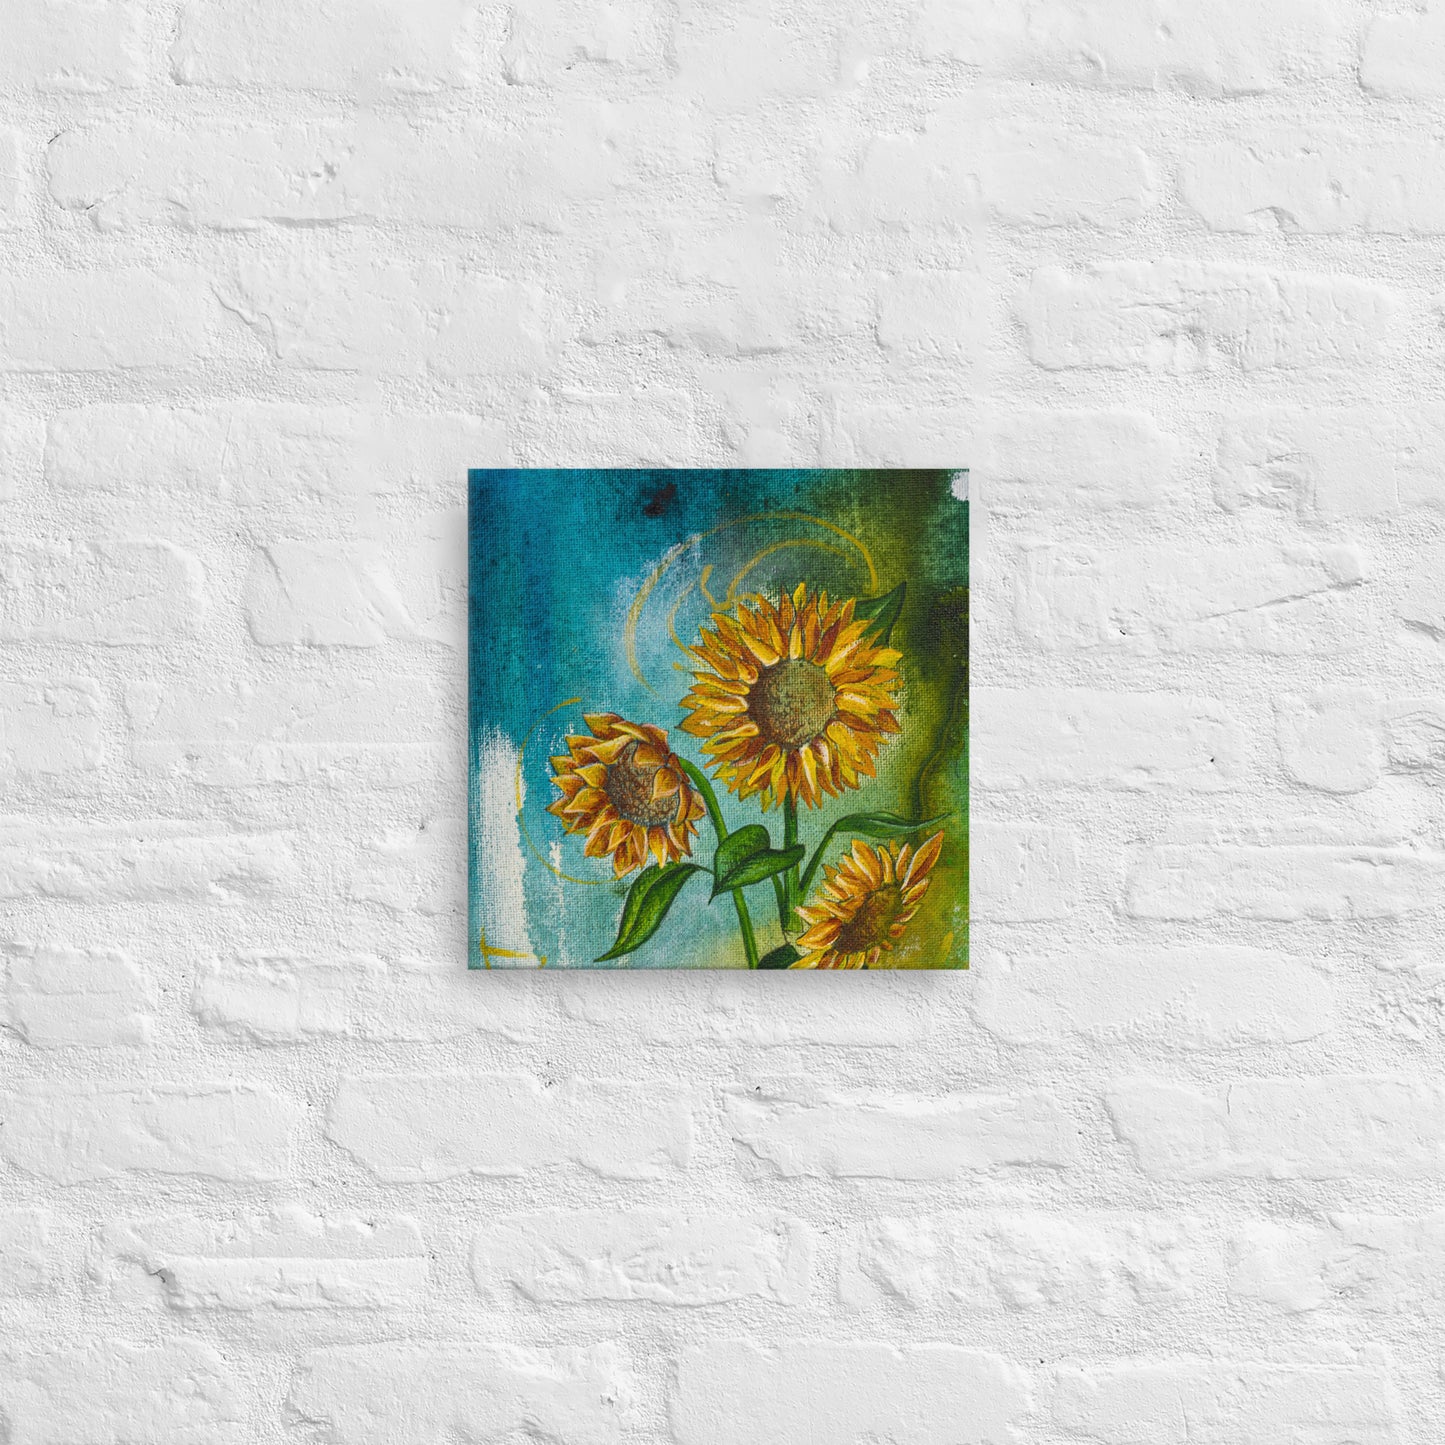 Flower Study (Sunflower) - Mixed Media Printed Canvas